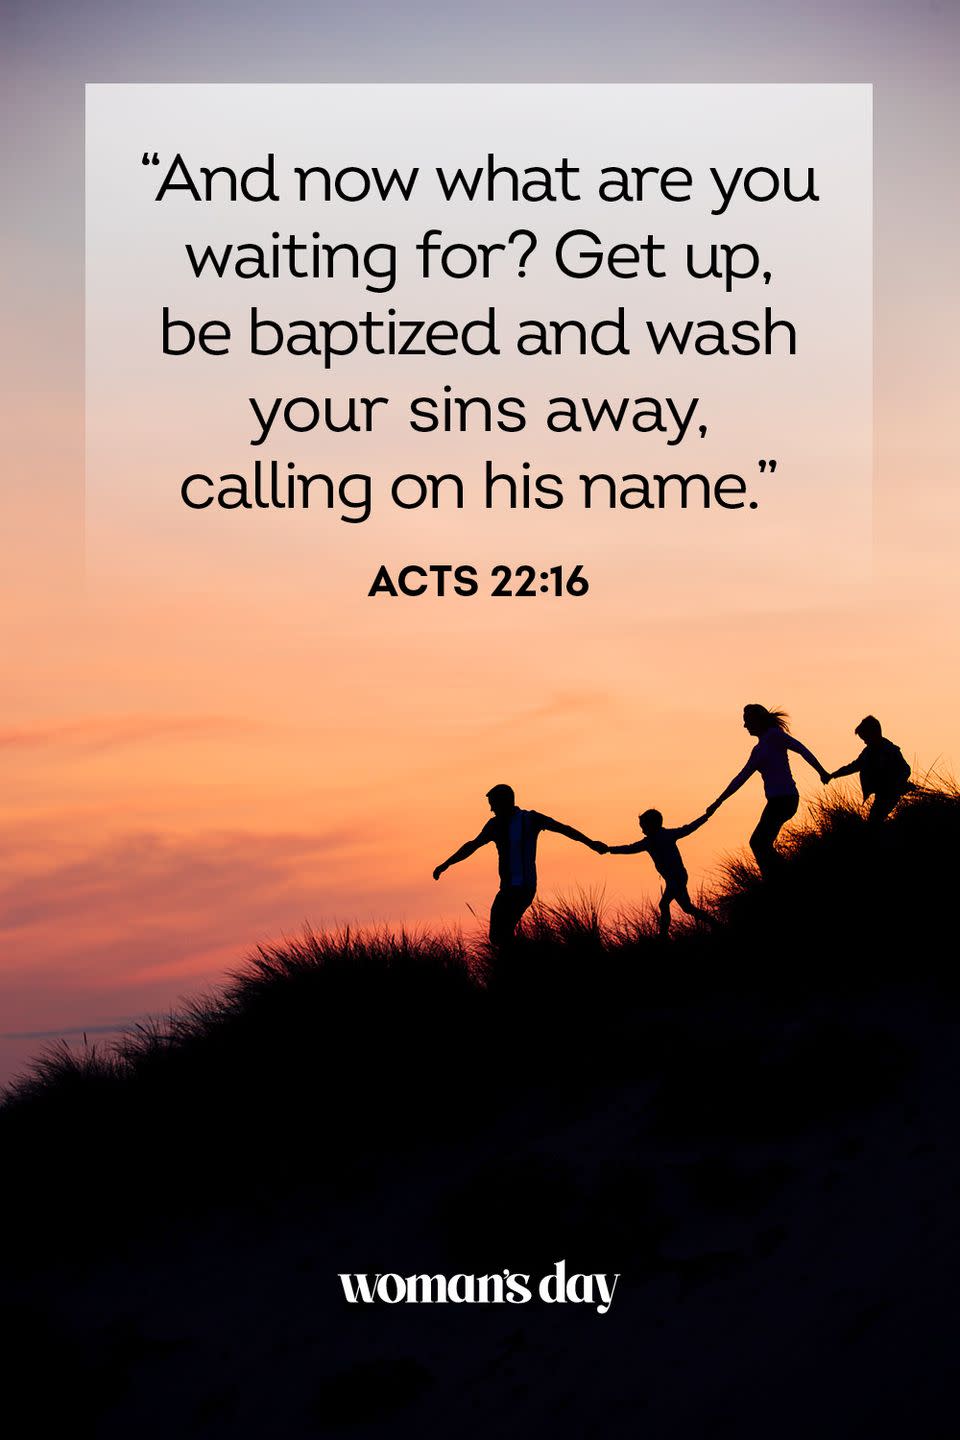 13) Acts 22:16